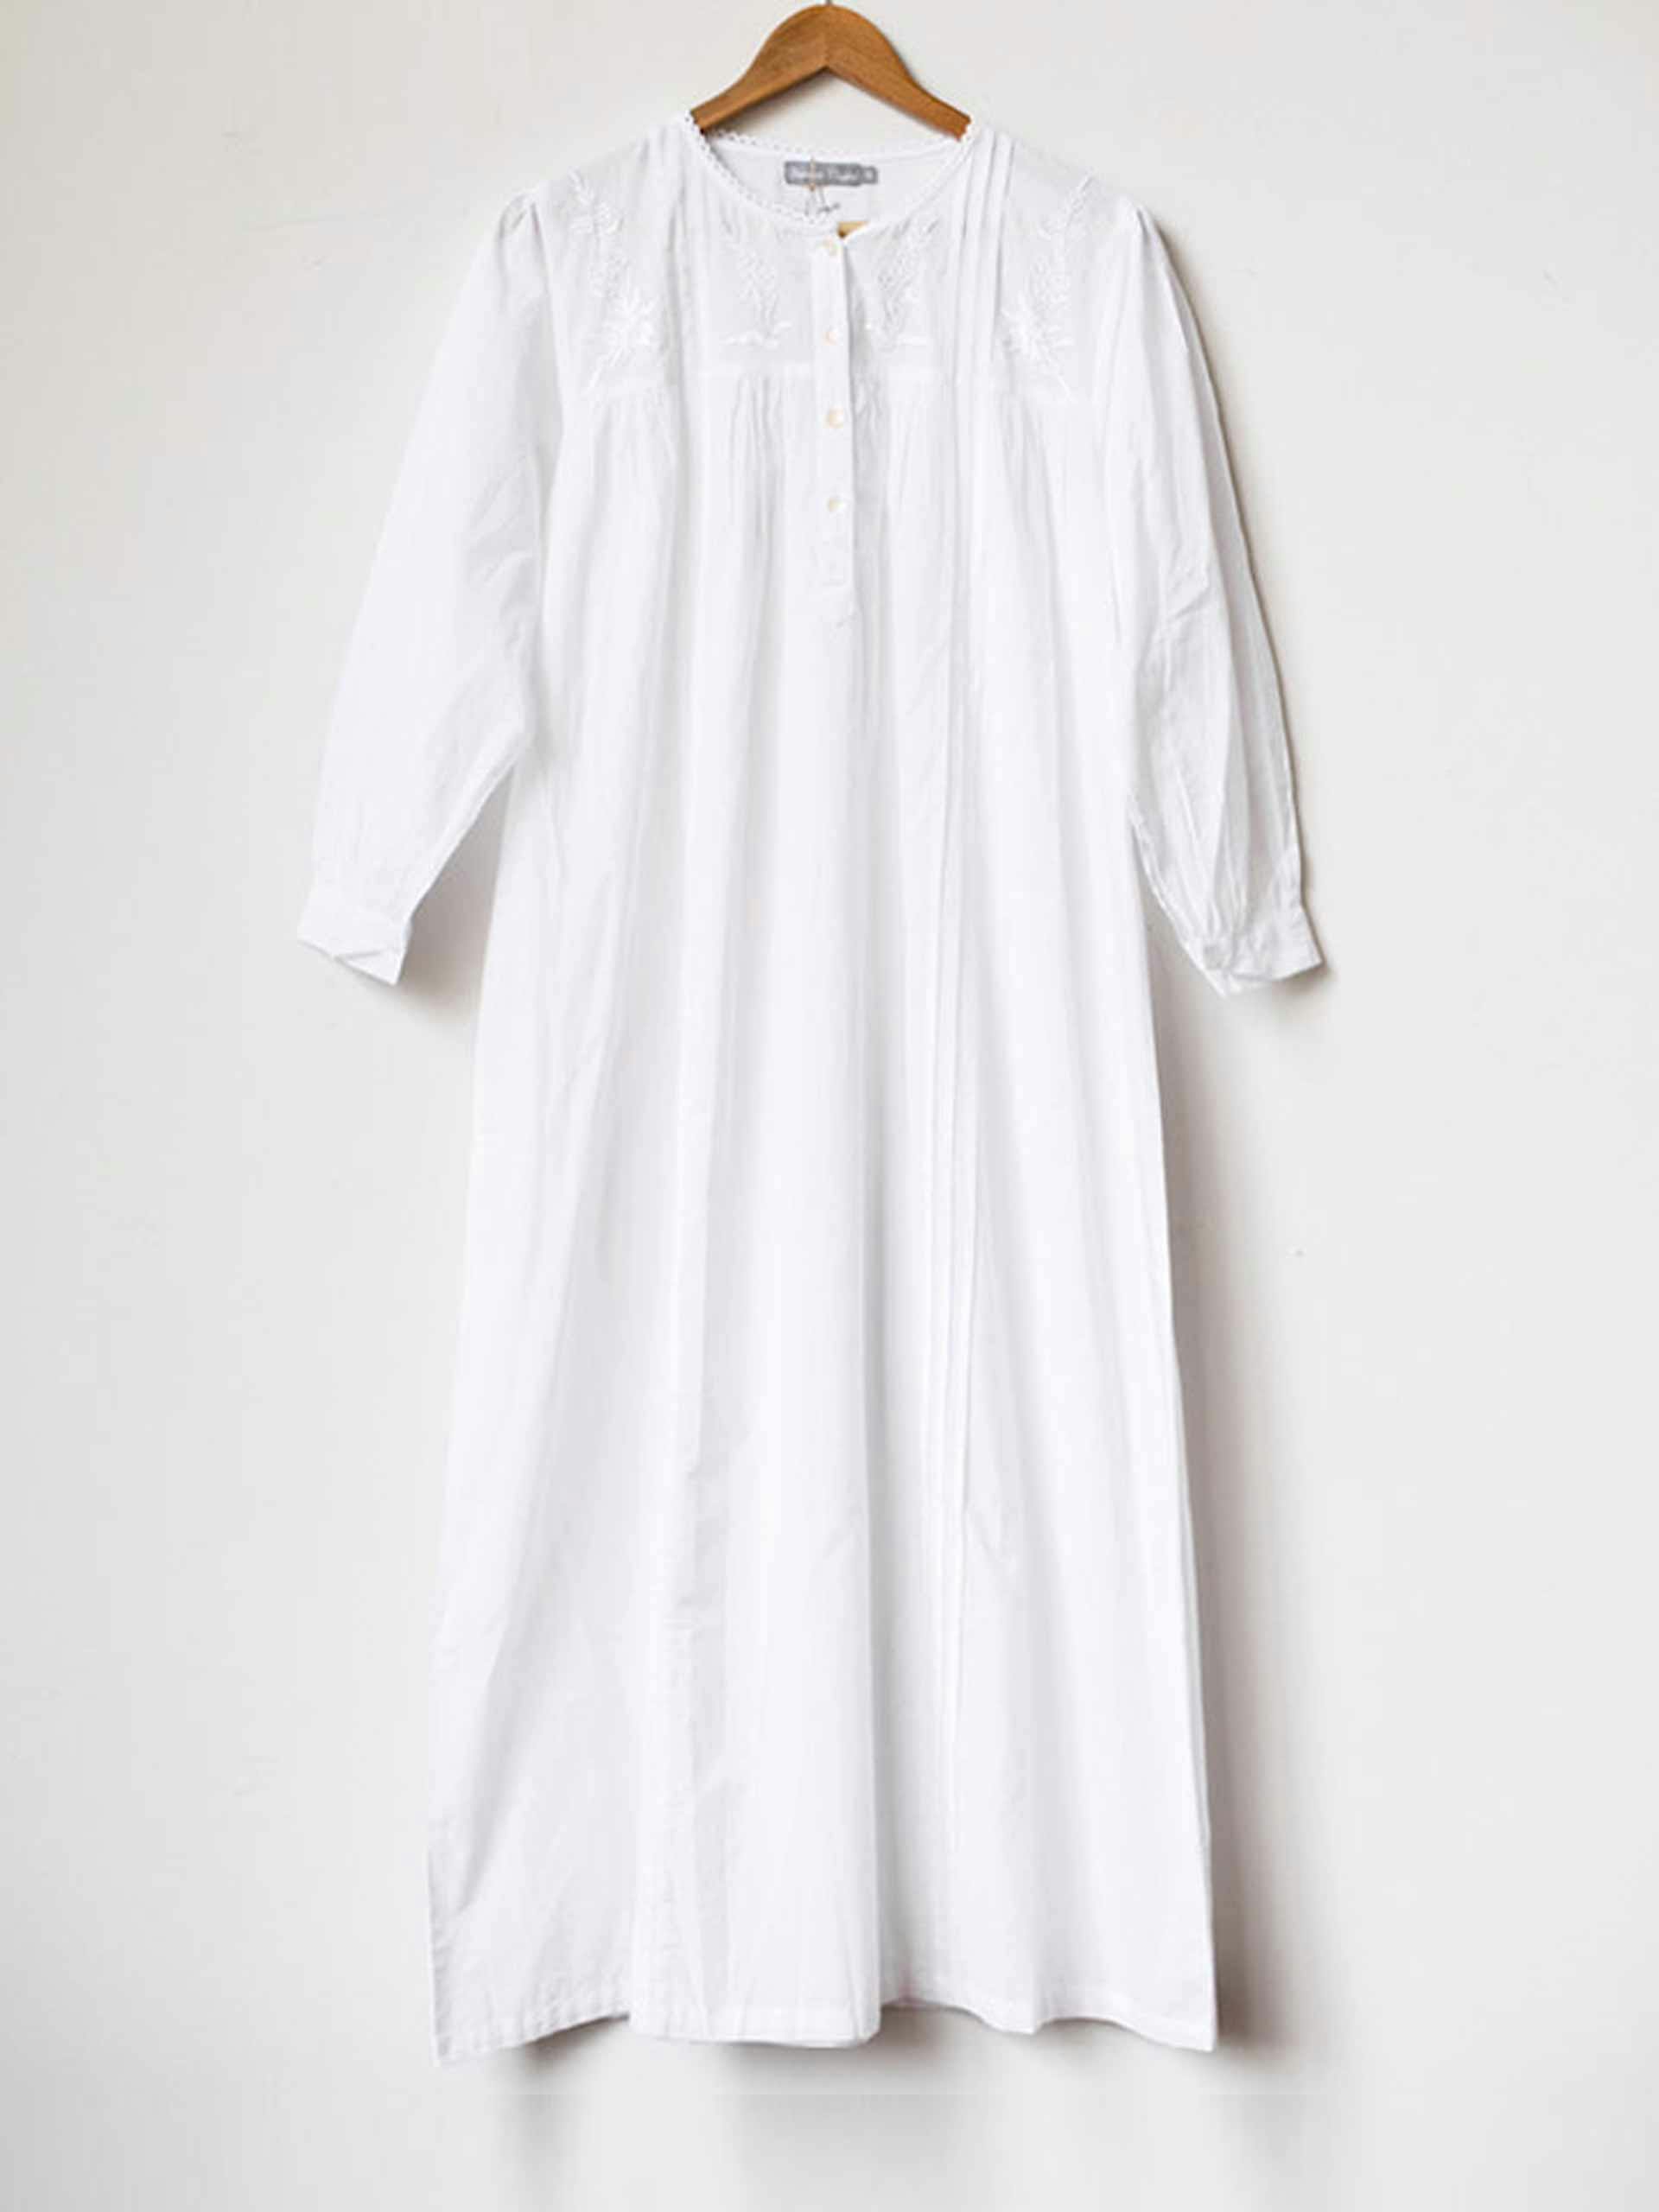 Long-sleeve white cotton nightgown